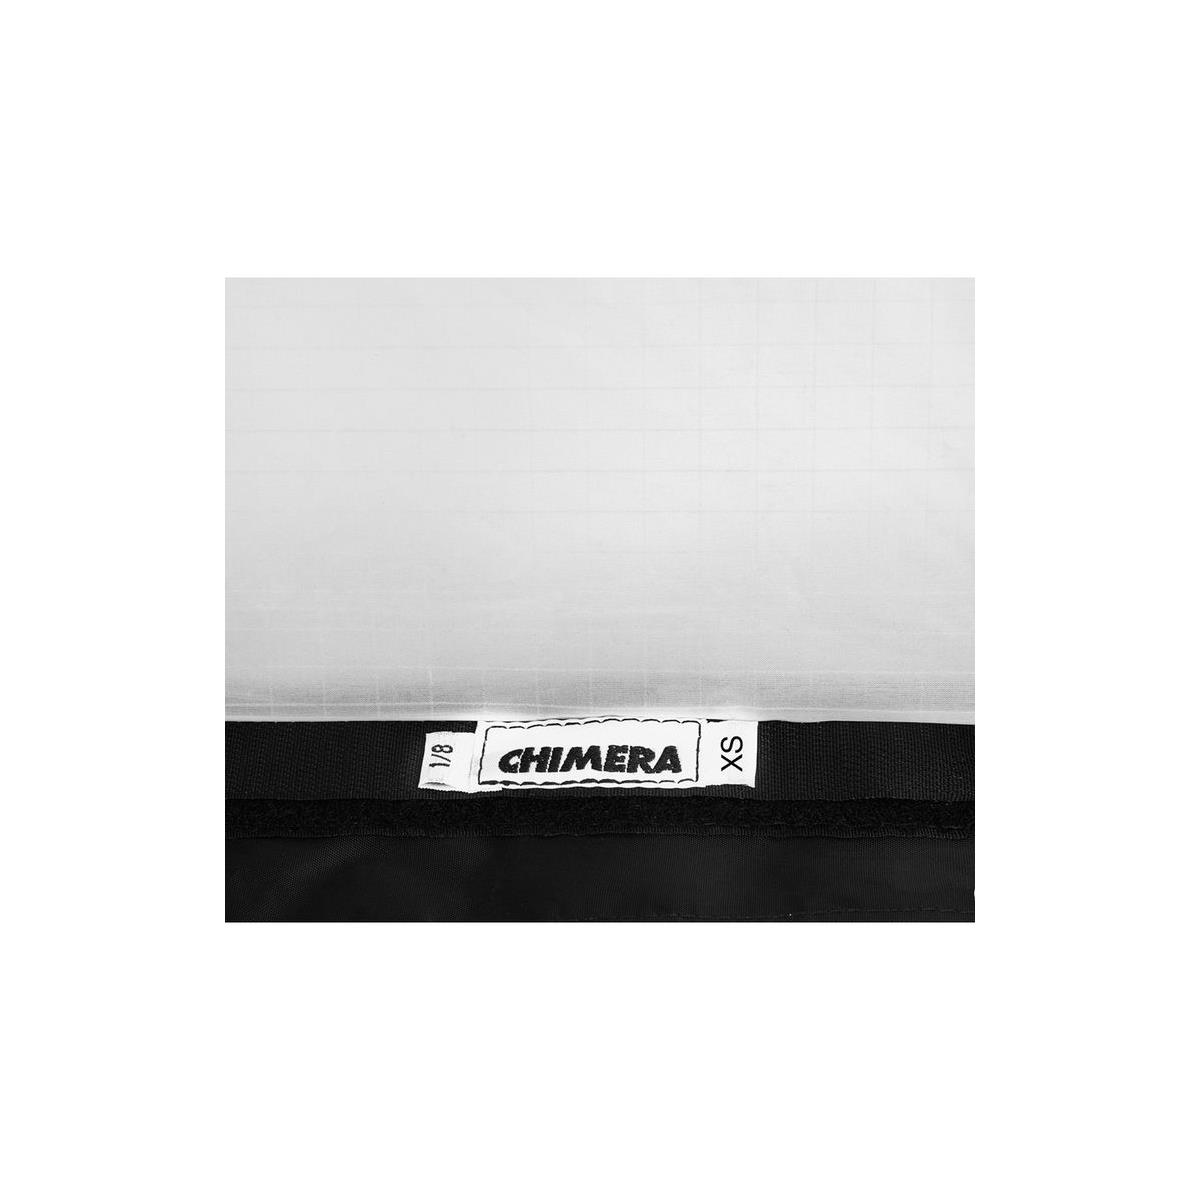 Image of Chimera XSmall 1/8 Grid Front Screen Diffuser for Video Pro LH Lightbanks